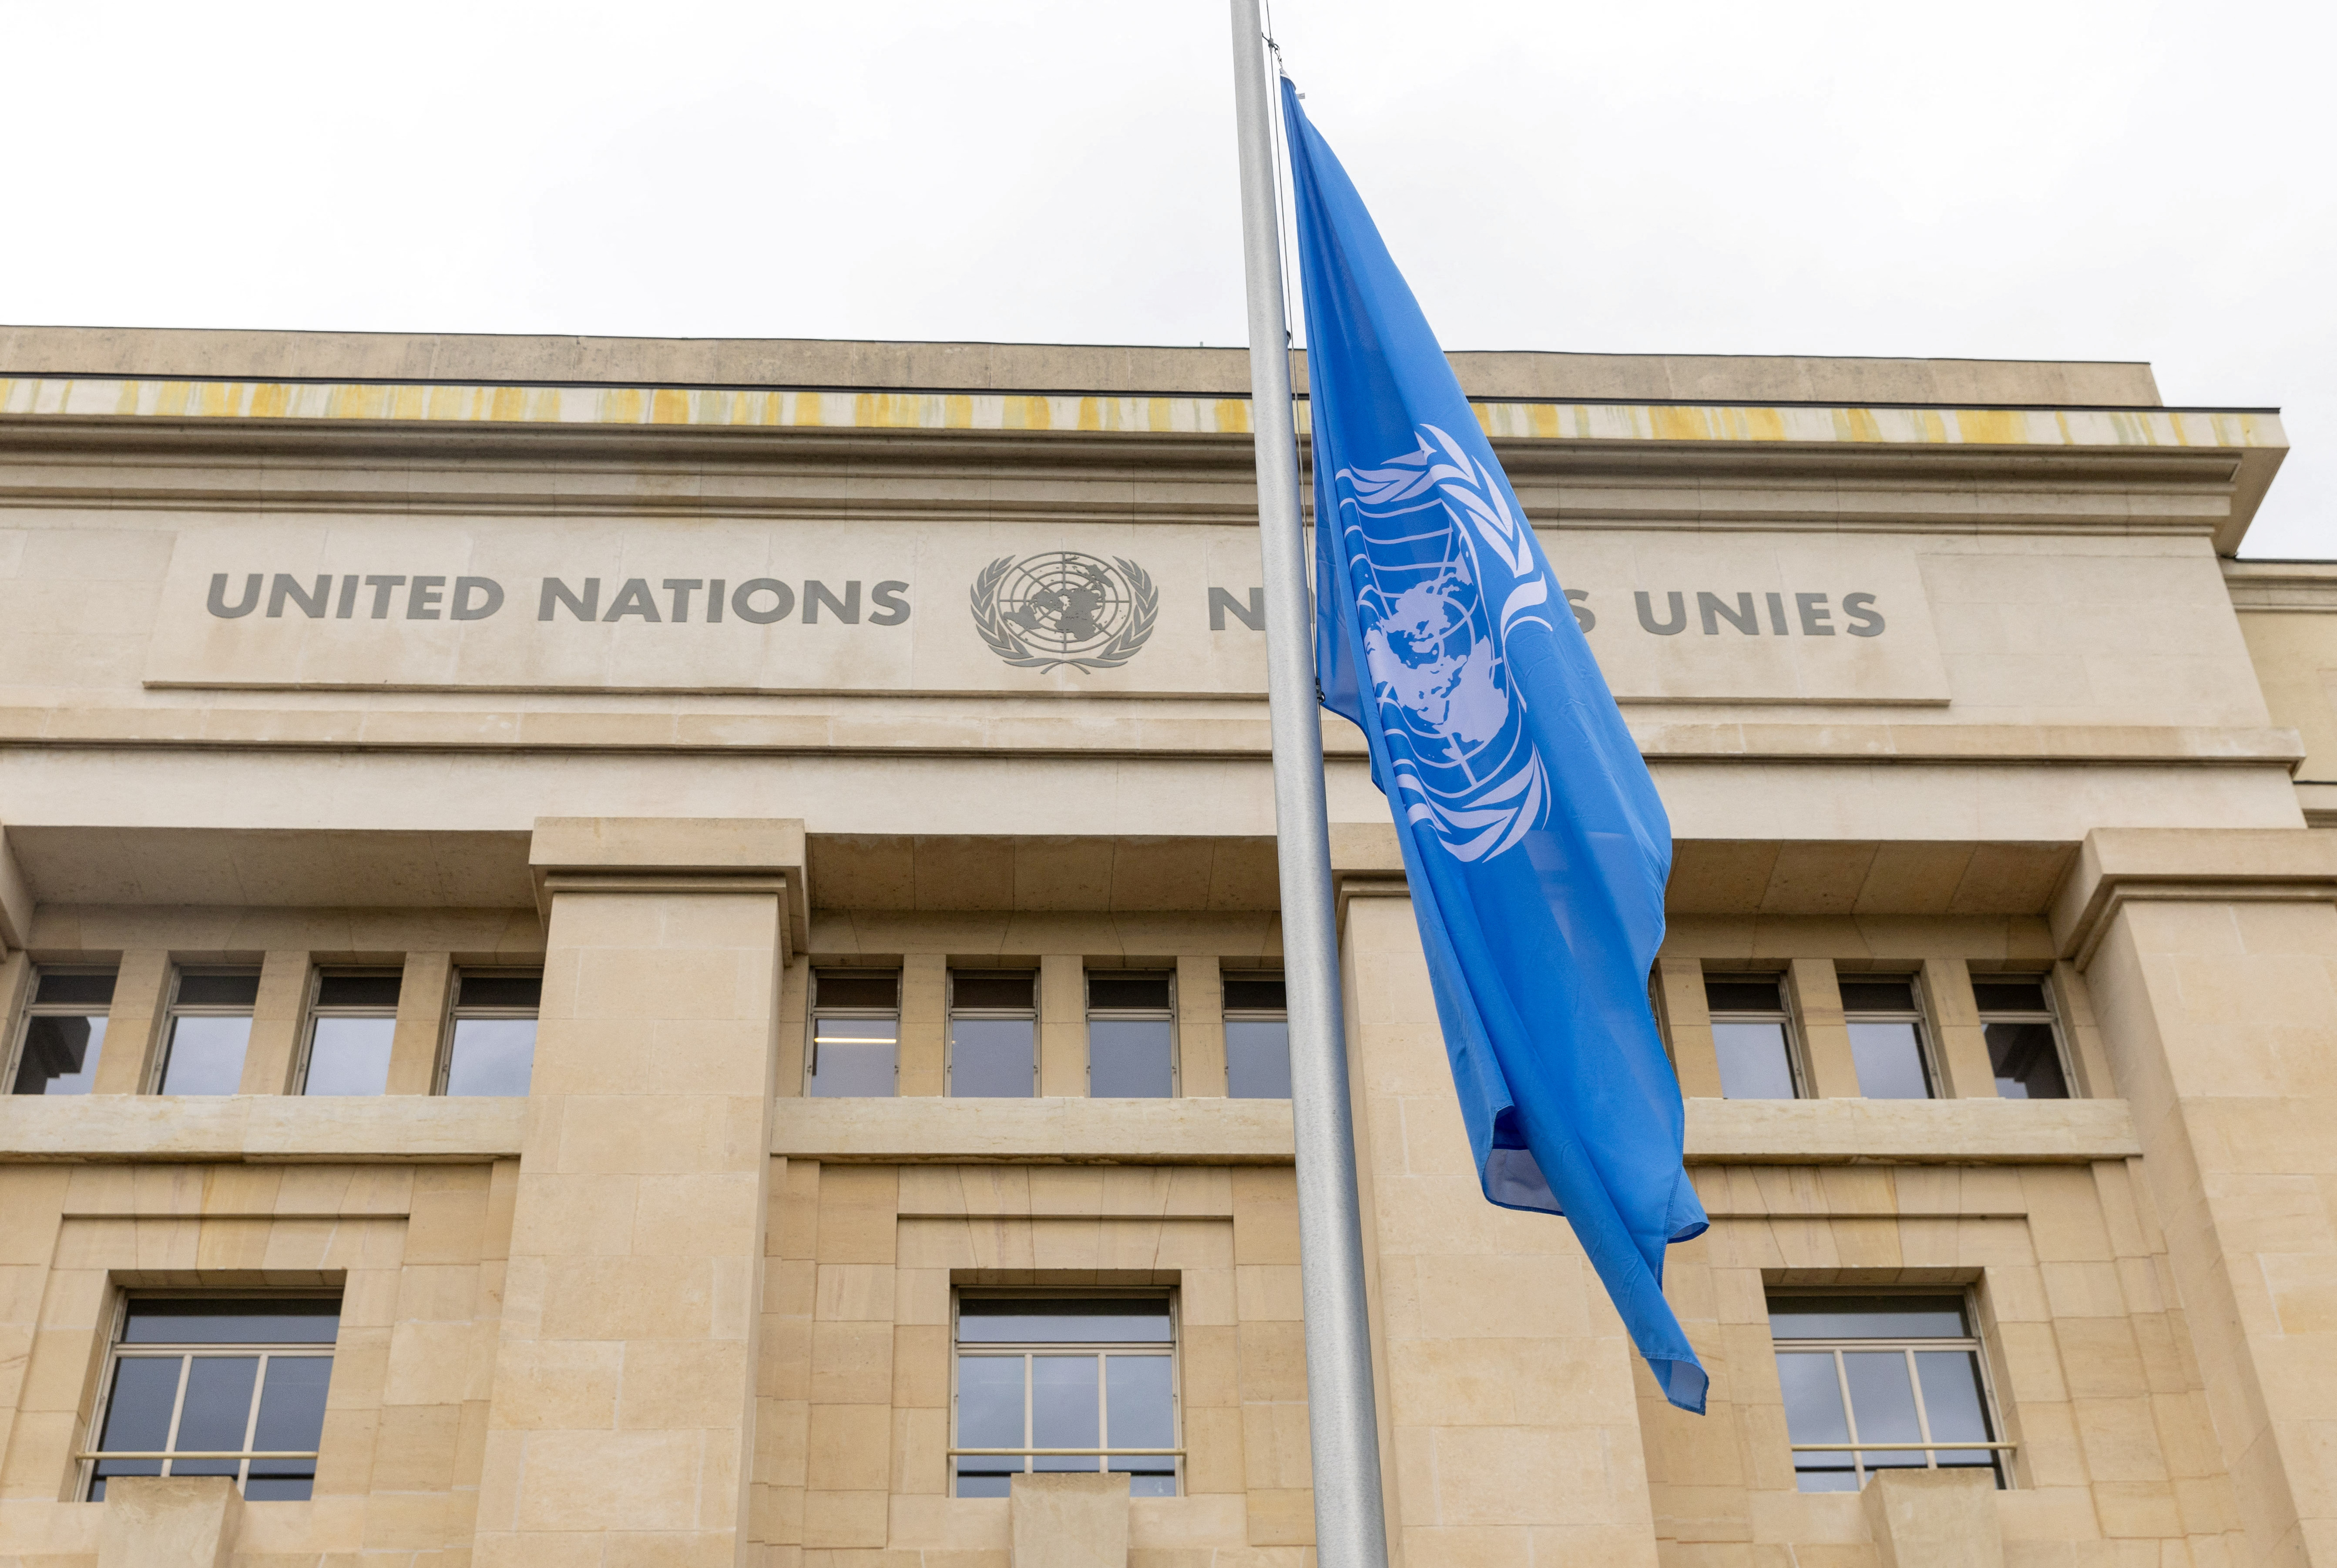 The United Nations flag flies at half-mast at the European headquarters in Geneva